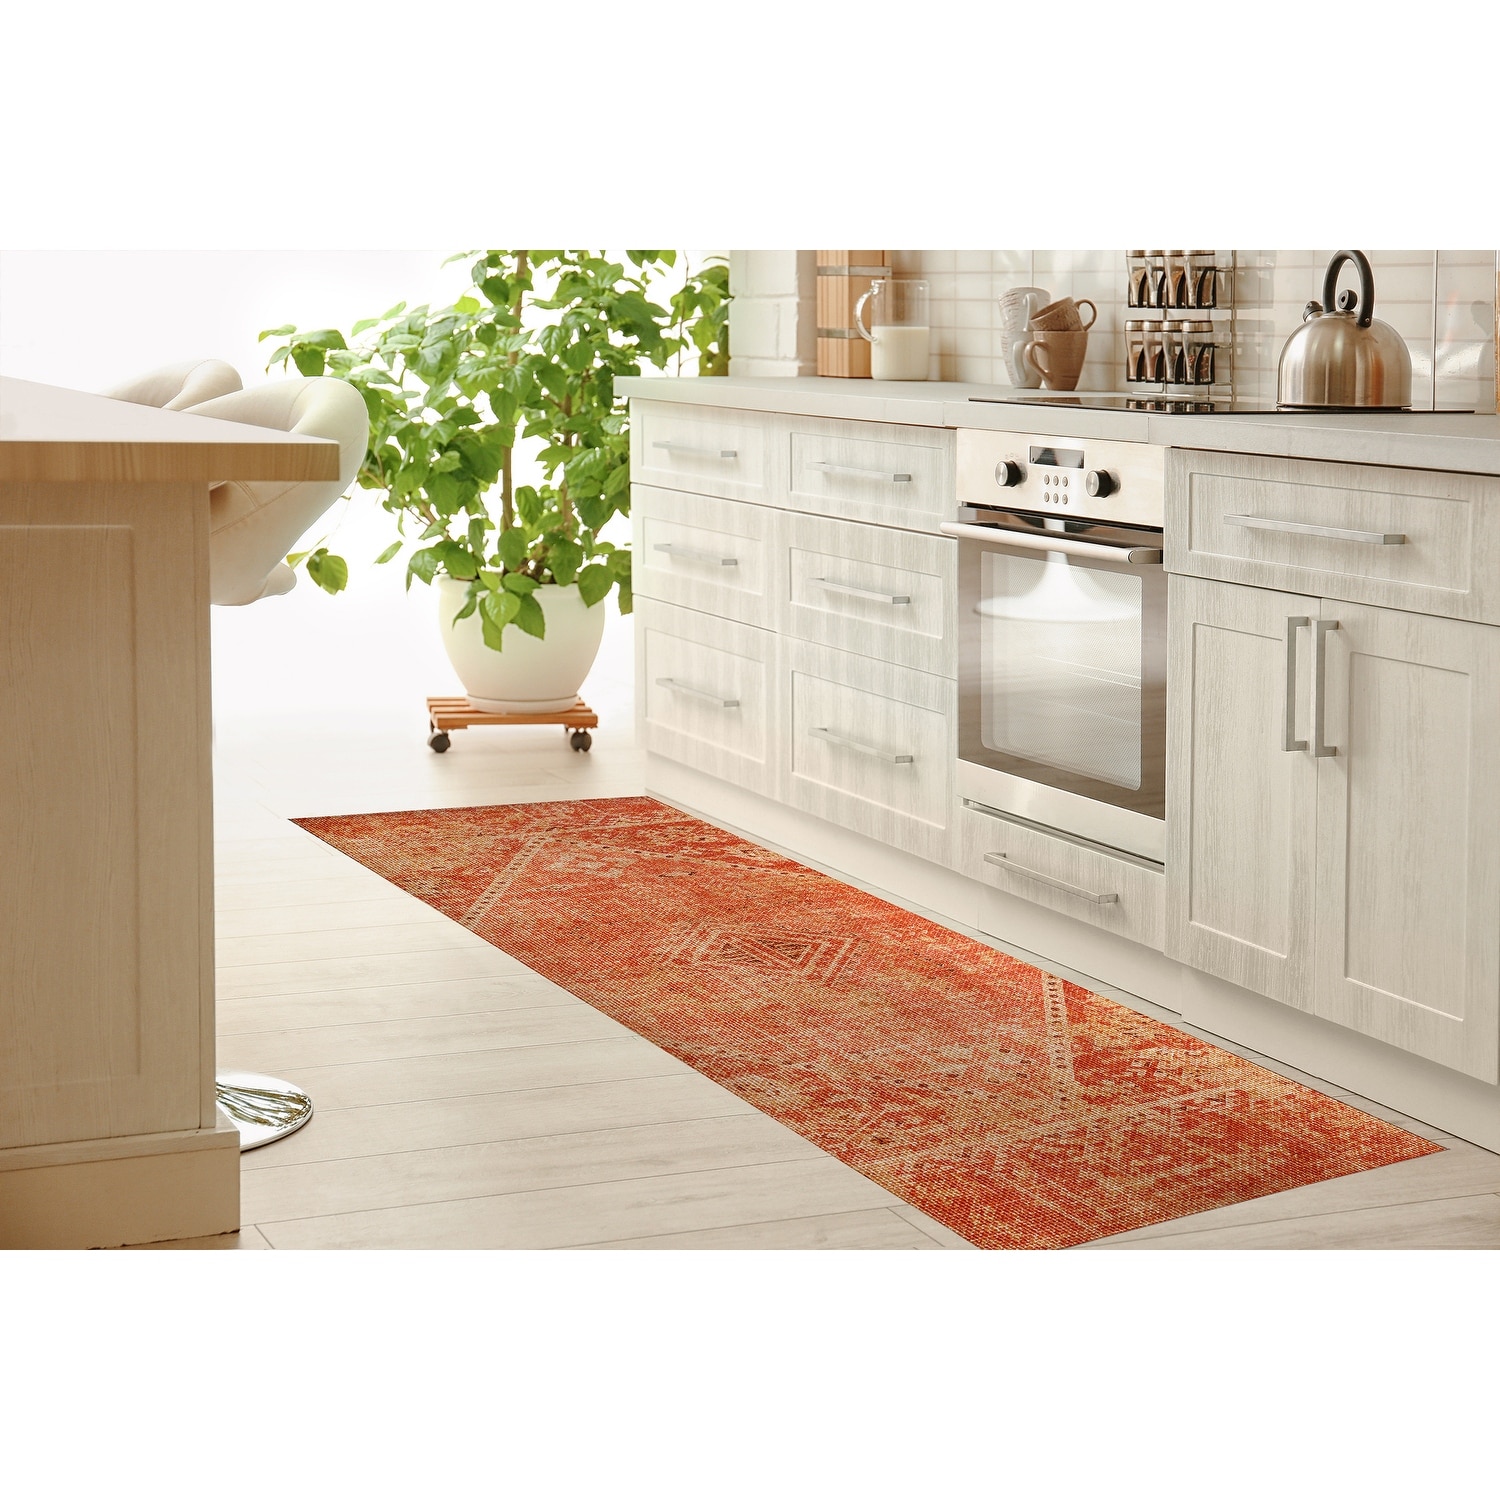 https://ak1.ostkcdn.com/images/products/is/images/direct/3aacec1ea885b6616c64f0580c2ad1b308e64390/PAC-ORANGE-Kitchen-Mat-By-Kavka-Designs.jpg